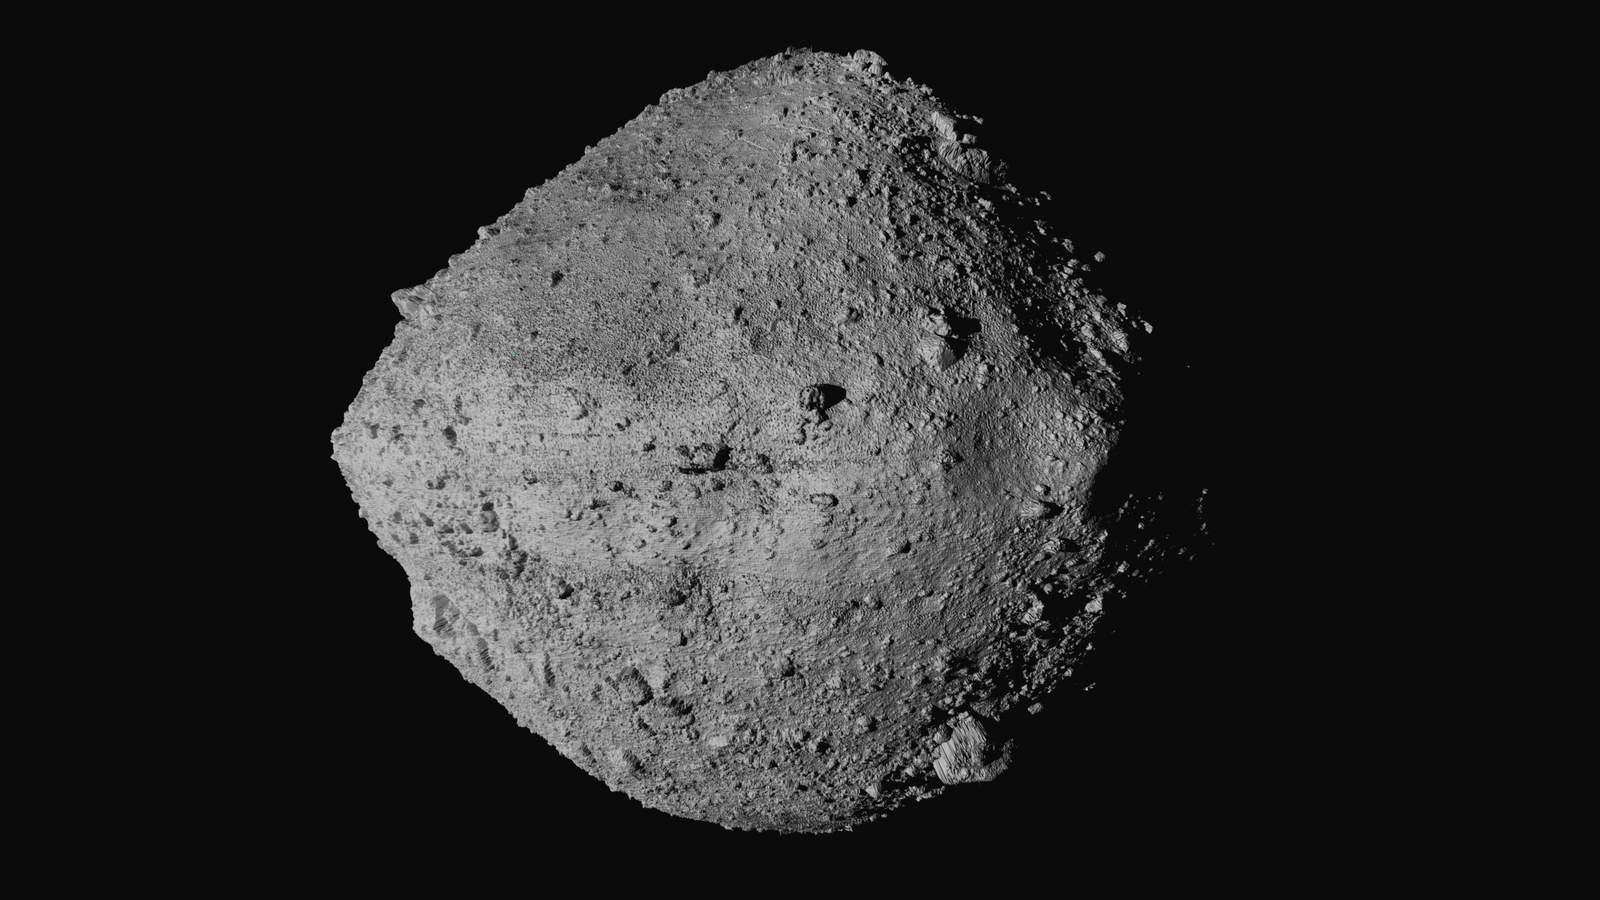 NASA spacecraft successfully ‘kisses’ asteroid to bring back sample to Earth